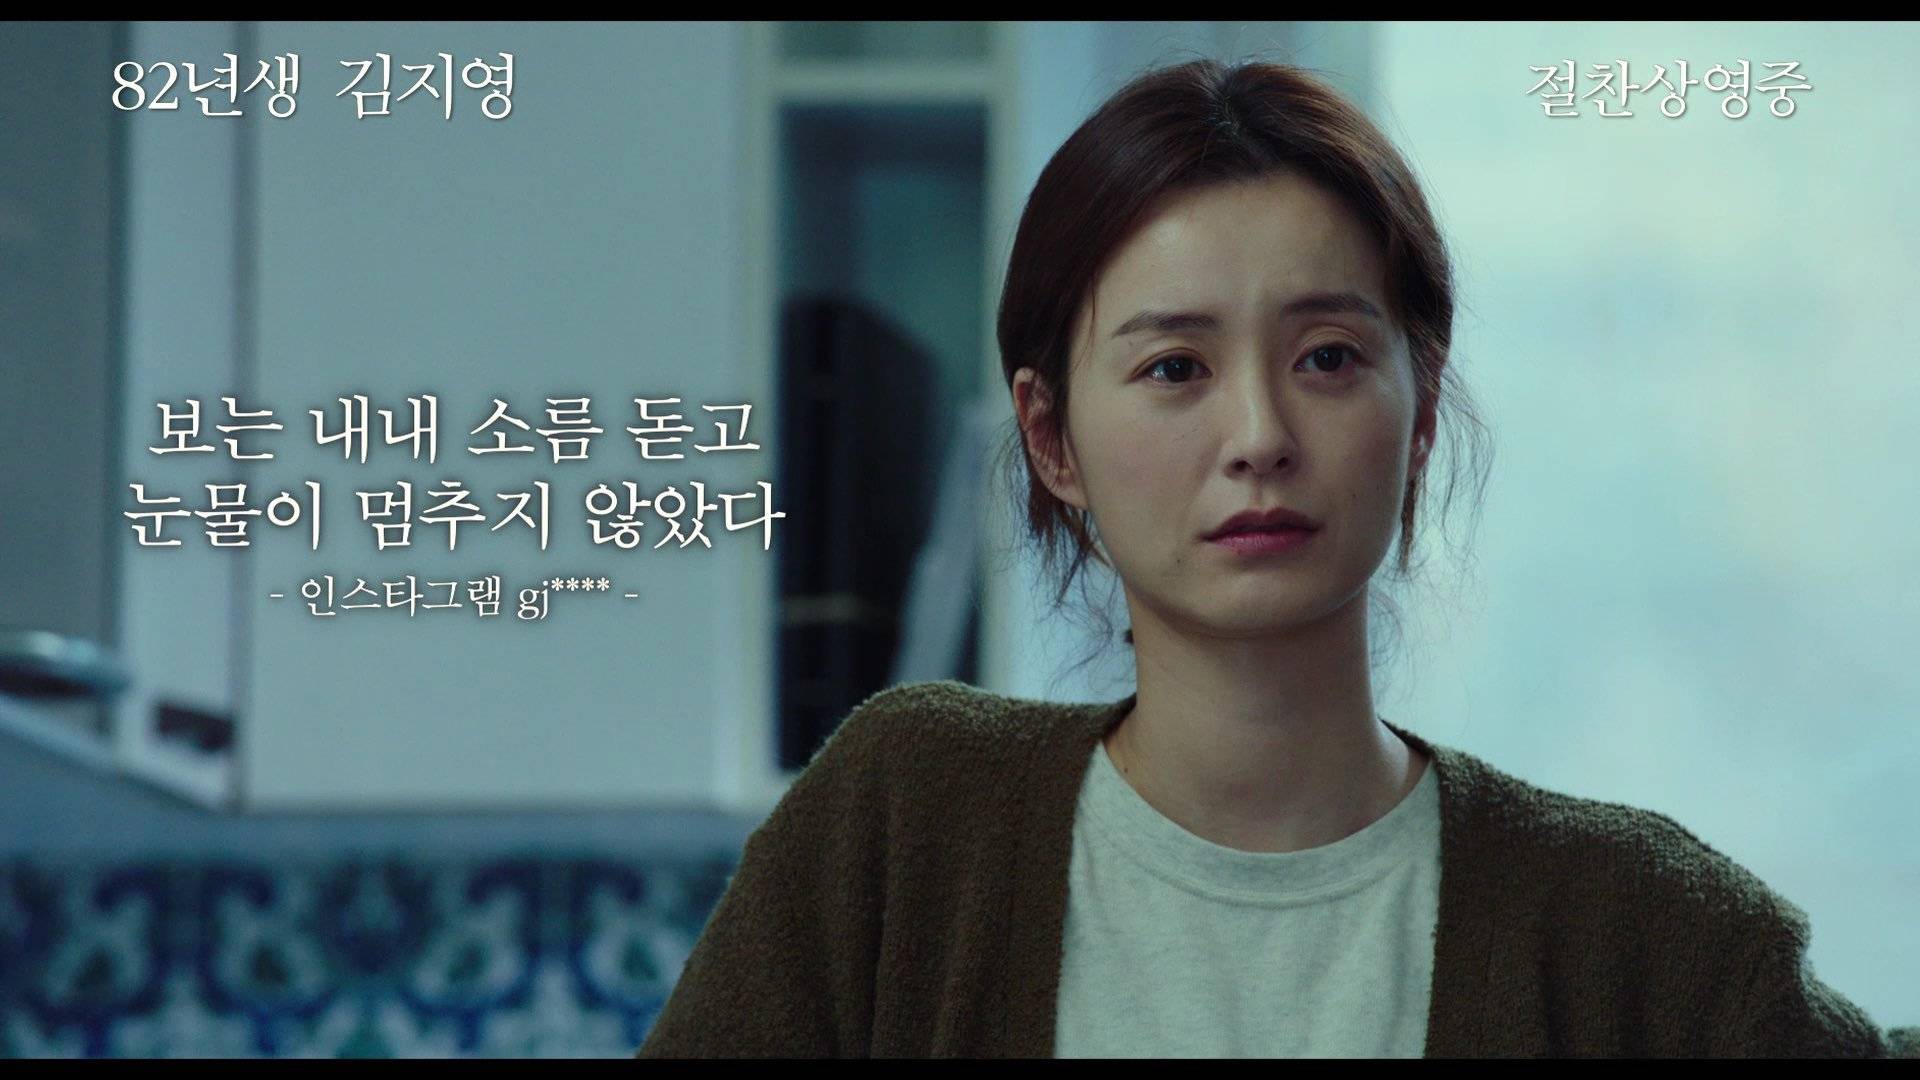 Video New Trailer Released For The Korean Movie Kim Jiyoung